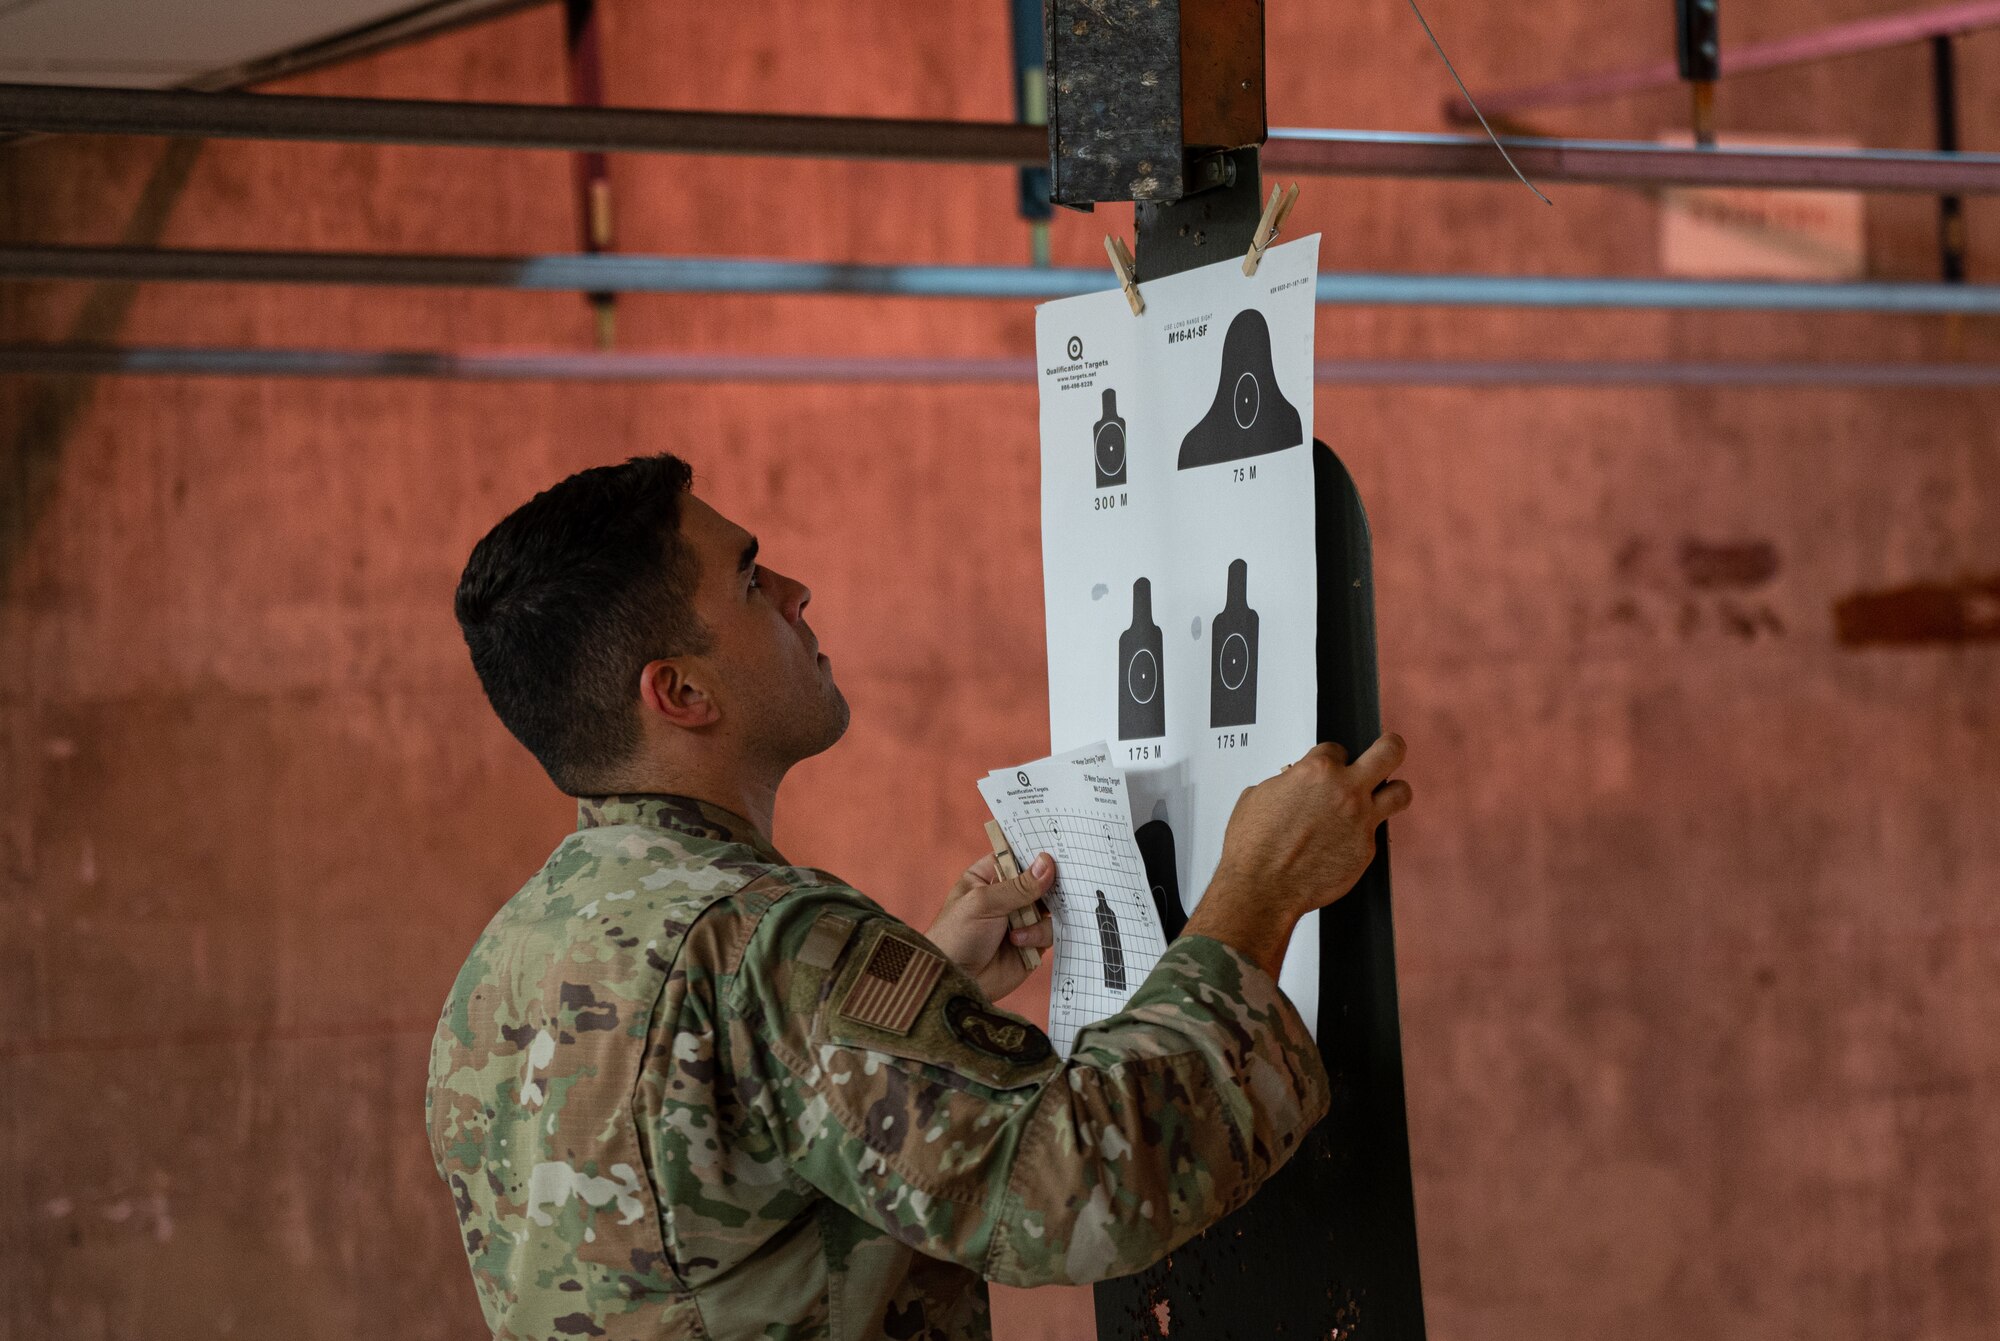 U.S. Air Force Senior Airman Ramon Rosa Aponte, 56th Security Forces Squadron defender, hangs targets during a weapons qualification course Aug. 3, 2021, at Luke Air Force Base, Arizona.